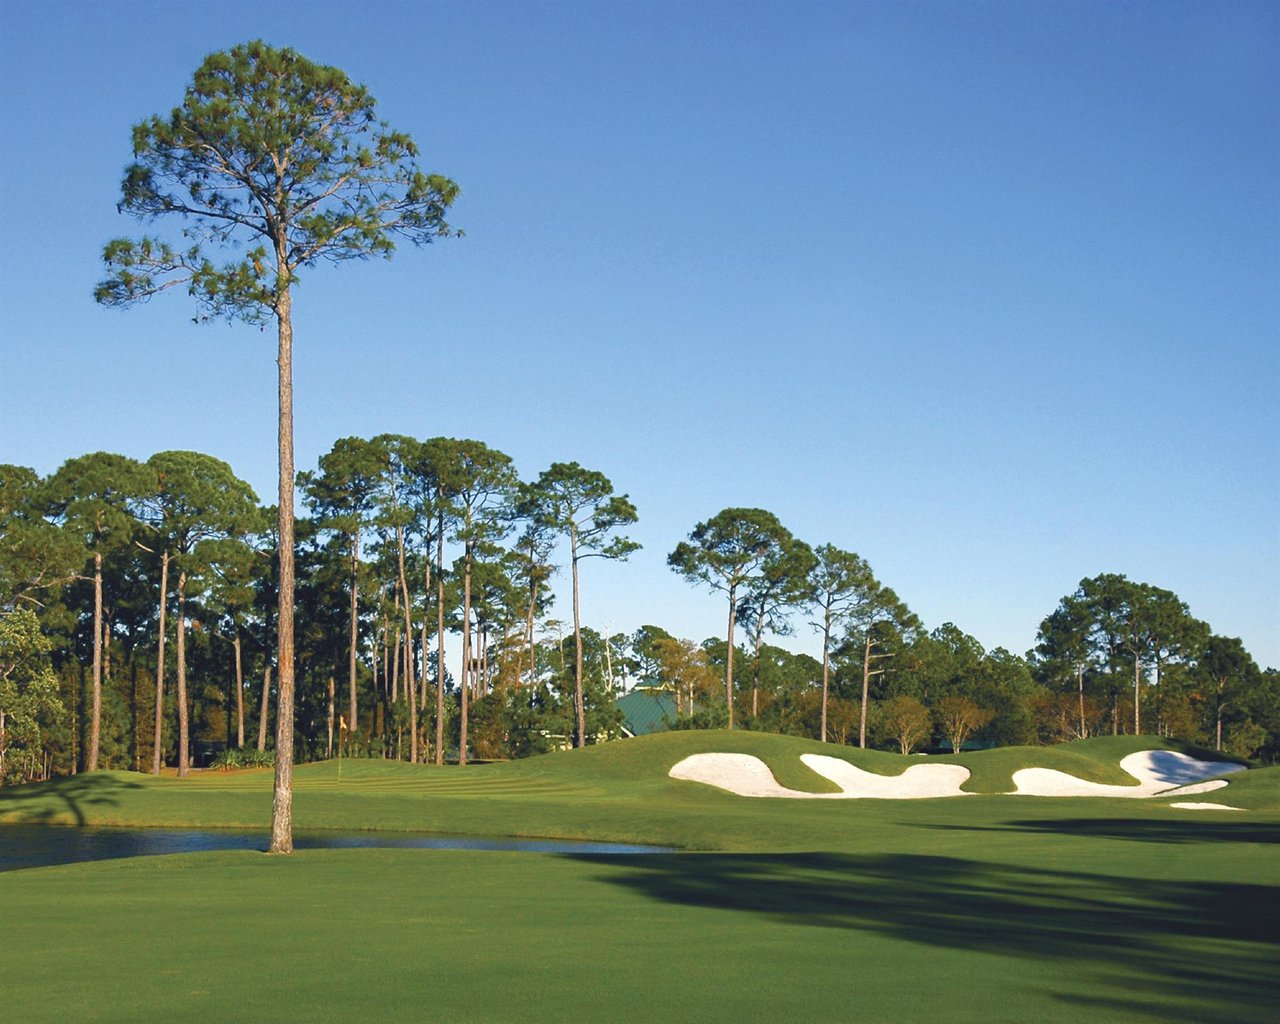 Enjoy discounted golf at  Sandestin Golf and Beach Resort as part of Tee Off for Toys weekend